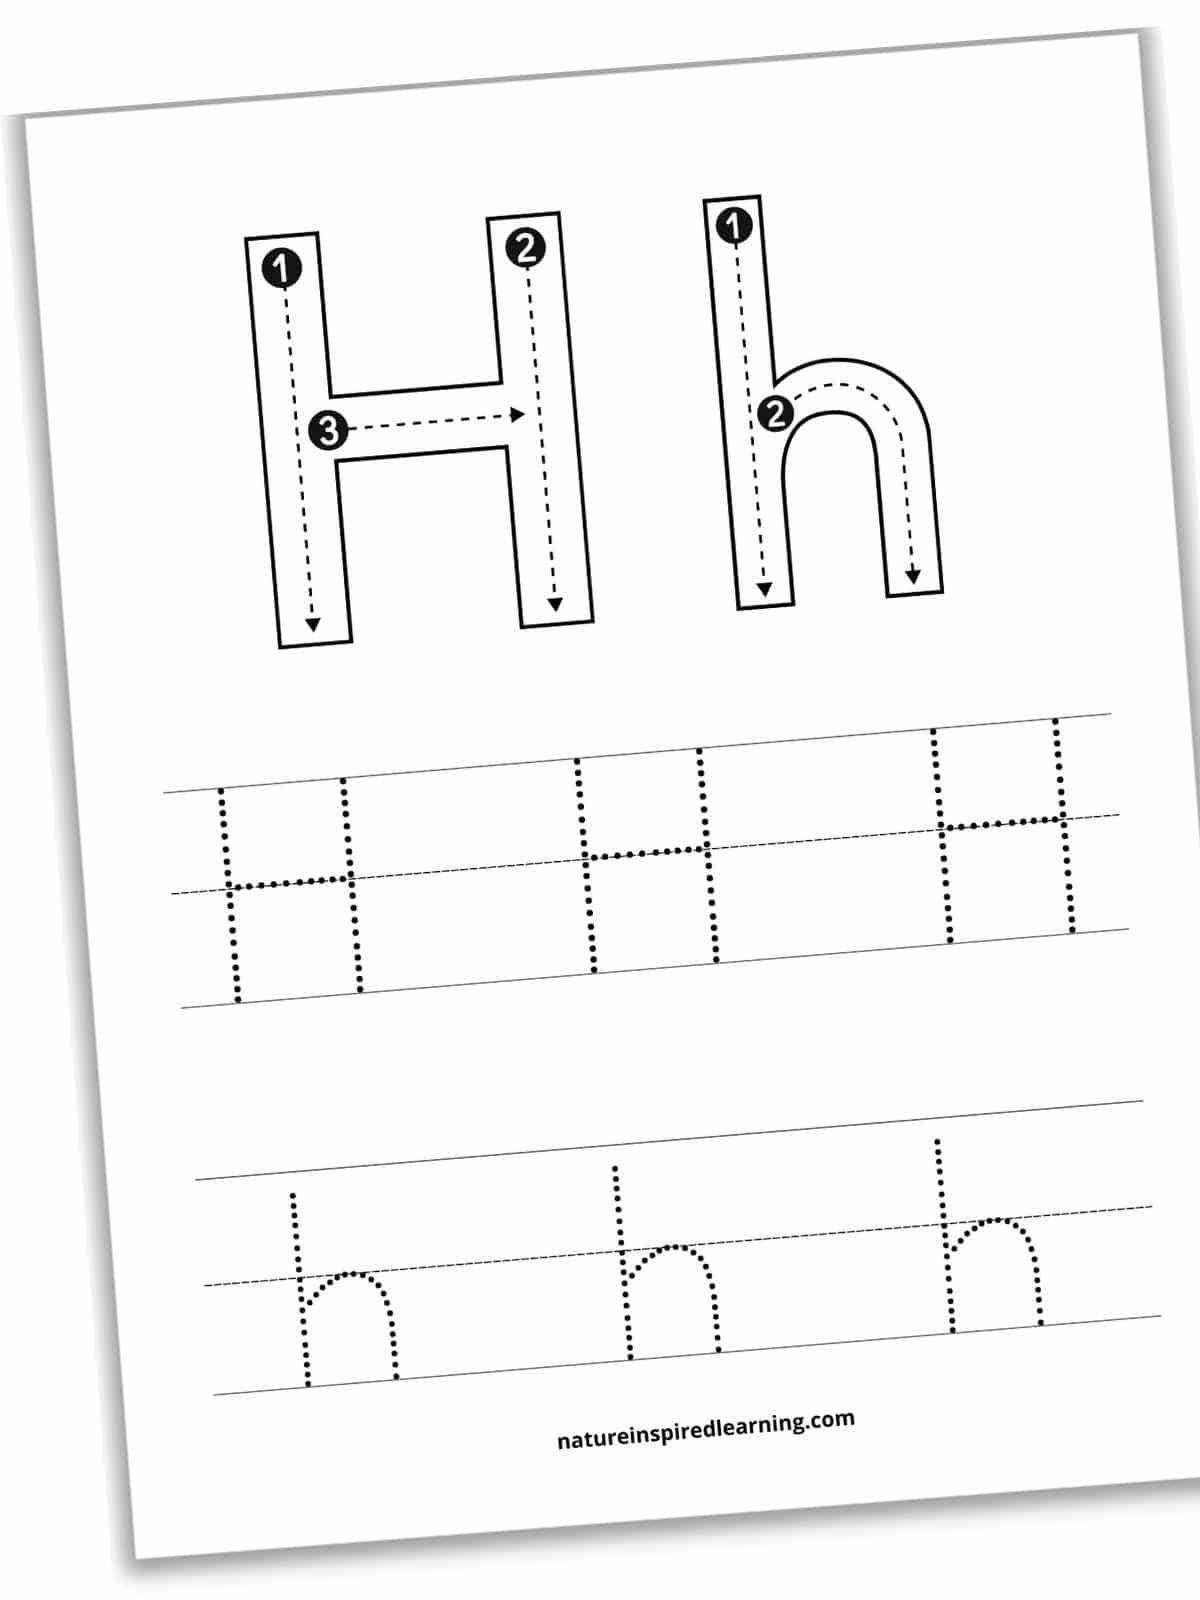 Worksheet with traceable capital and lowercase h's on the top half of the sheet with guidelines and arrows within the letters. Two sets of lines bottom half one with three dotted H's and one with three dotted h's.